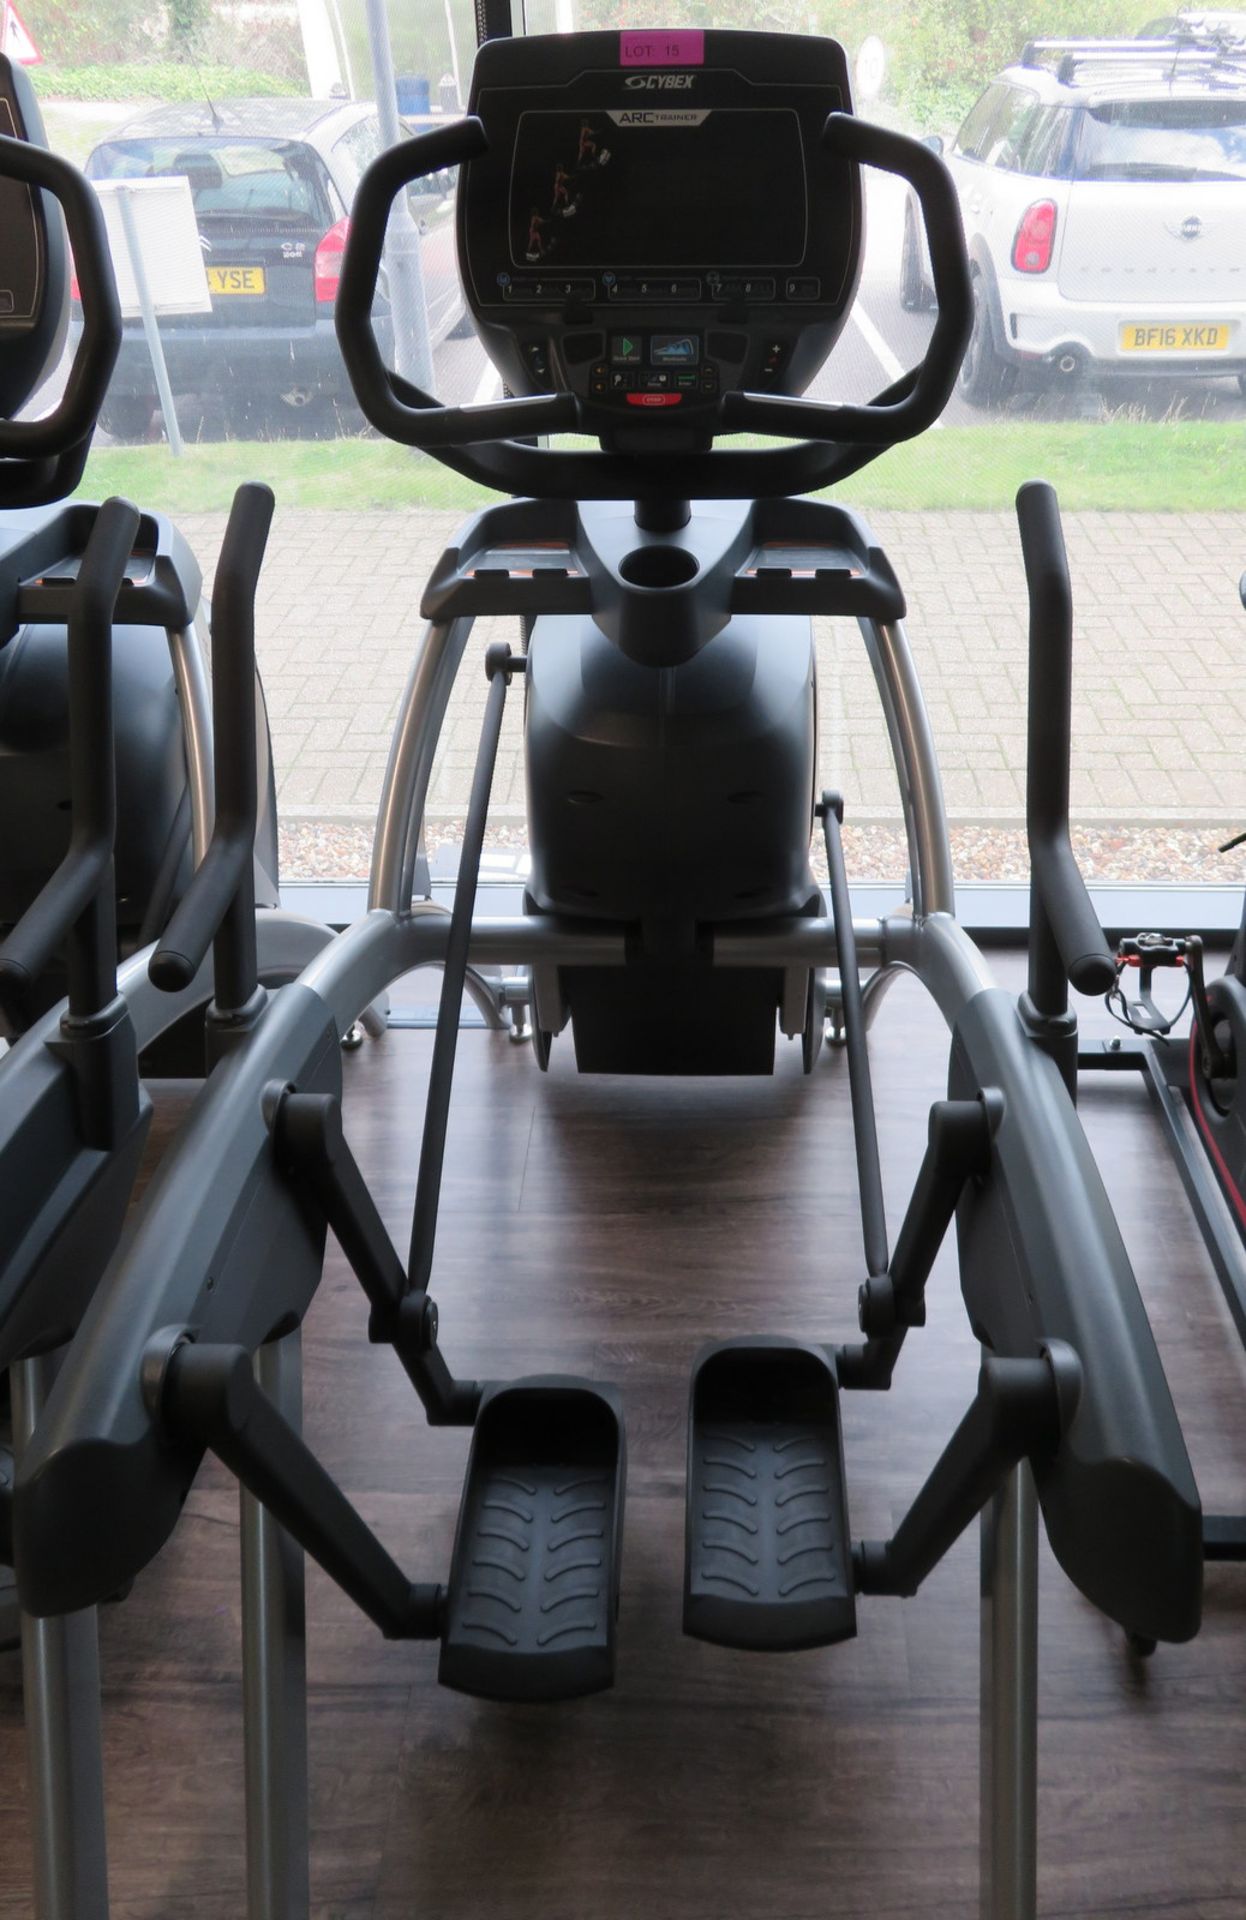 Cybex ARC Trainer High Intensity Trainer. LED Display. Good Working Condition. - Image 2 of 10